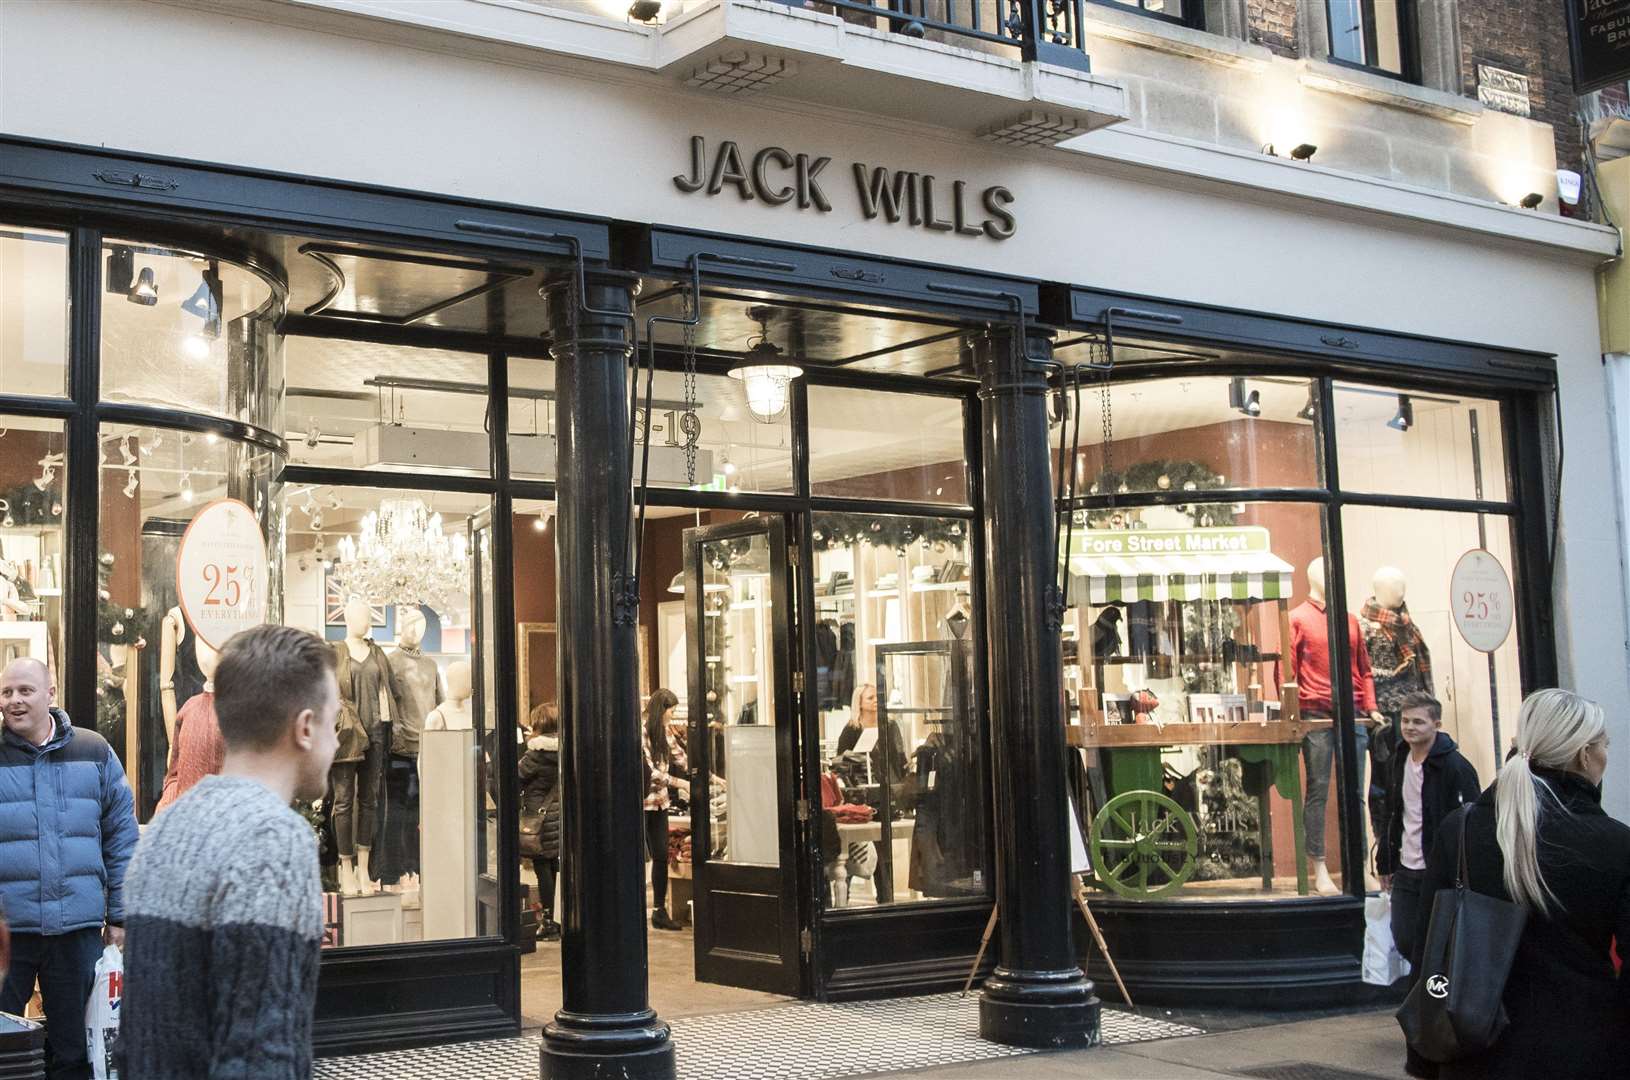 The future of Jack Wills remains uncertain